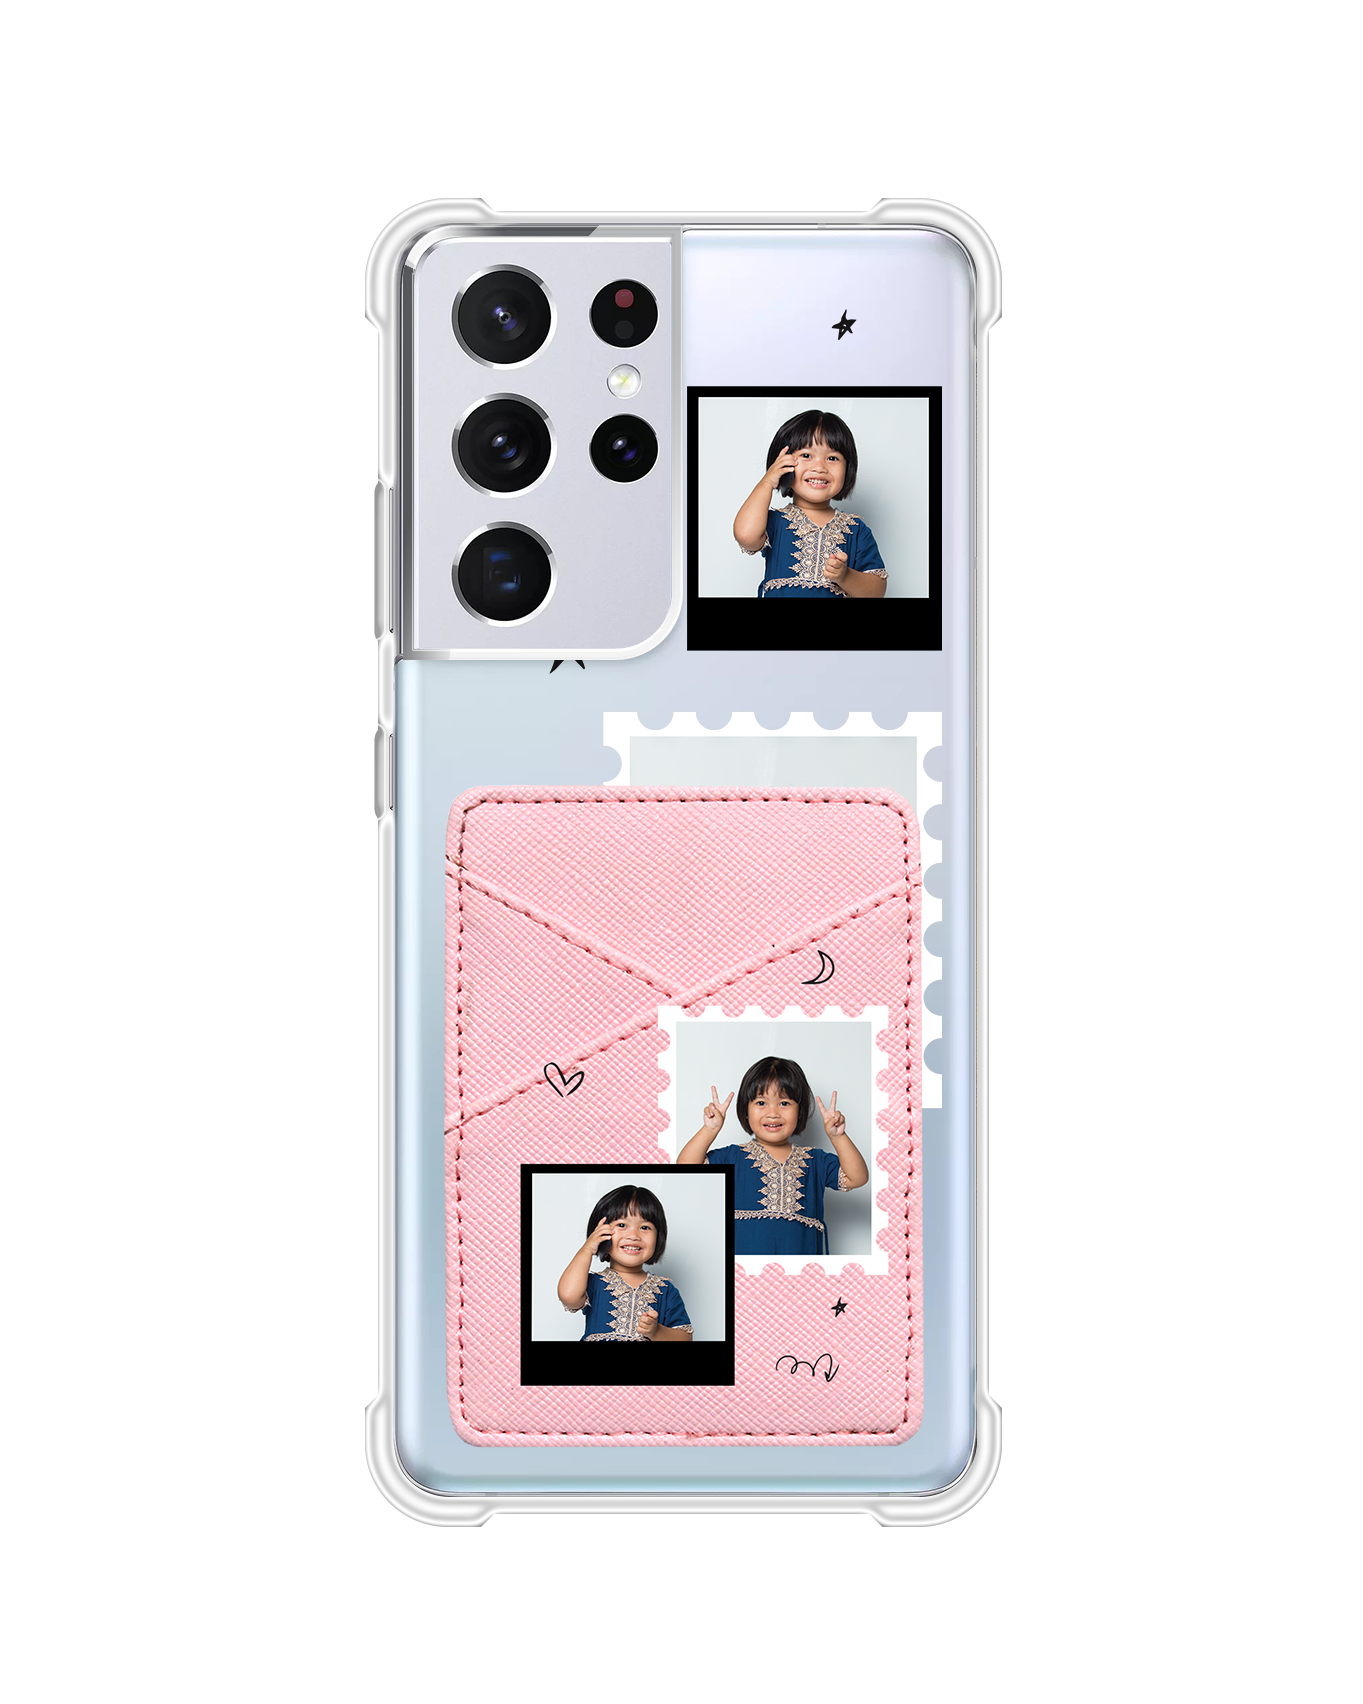 Android Phone Wallet Case - Face Grid Black Polaroid